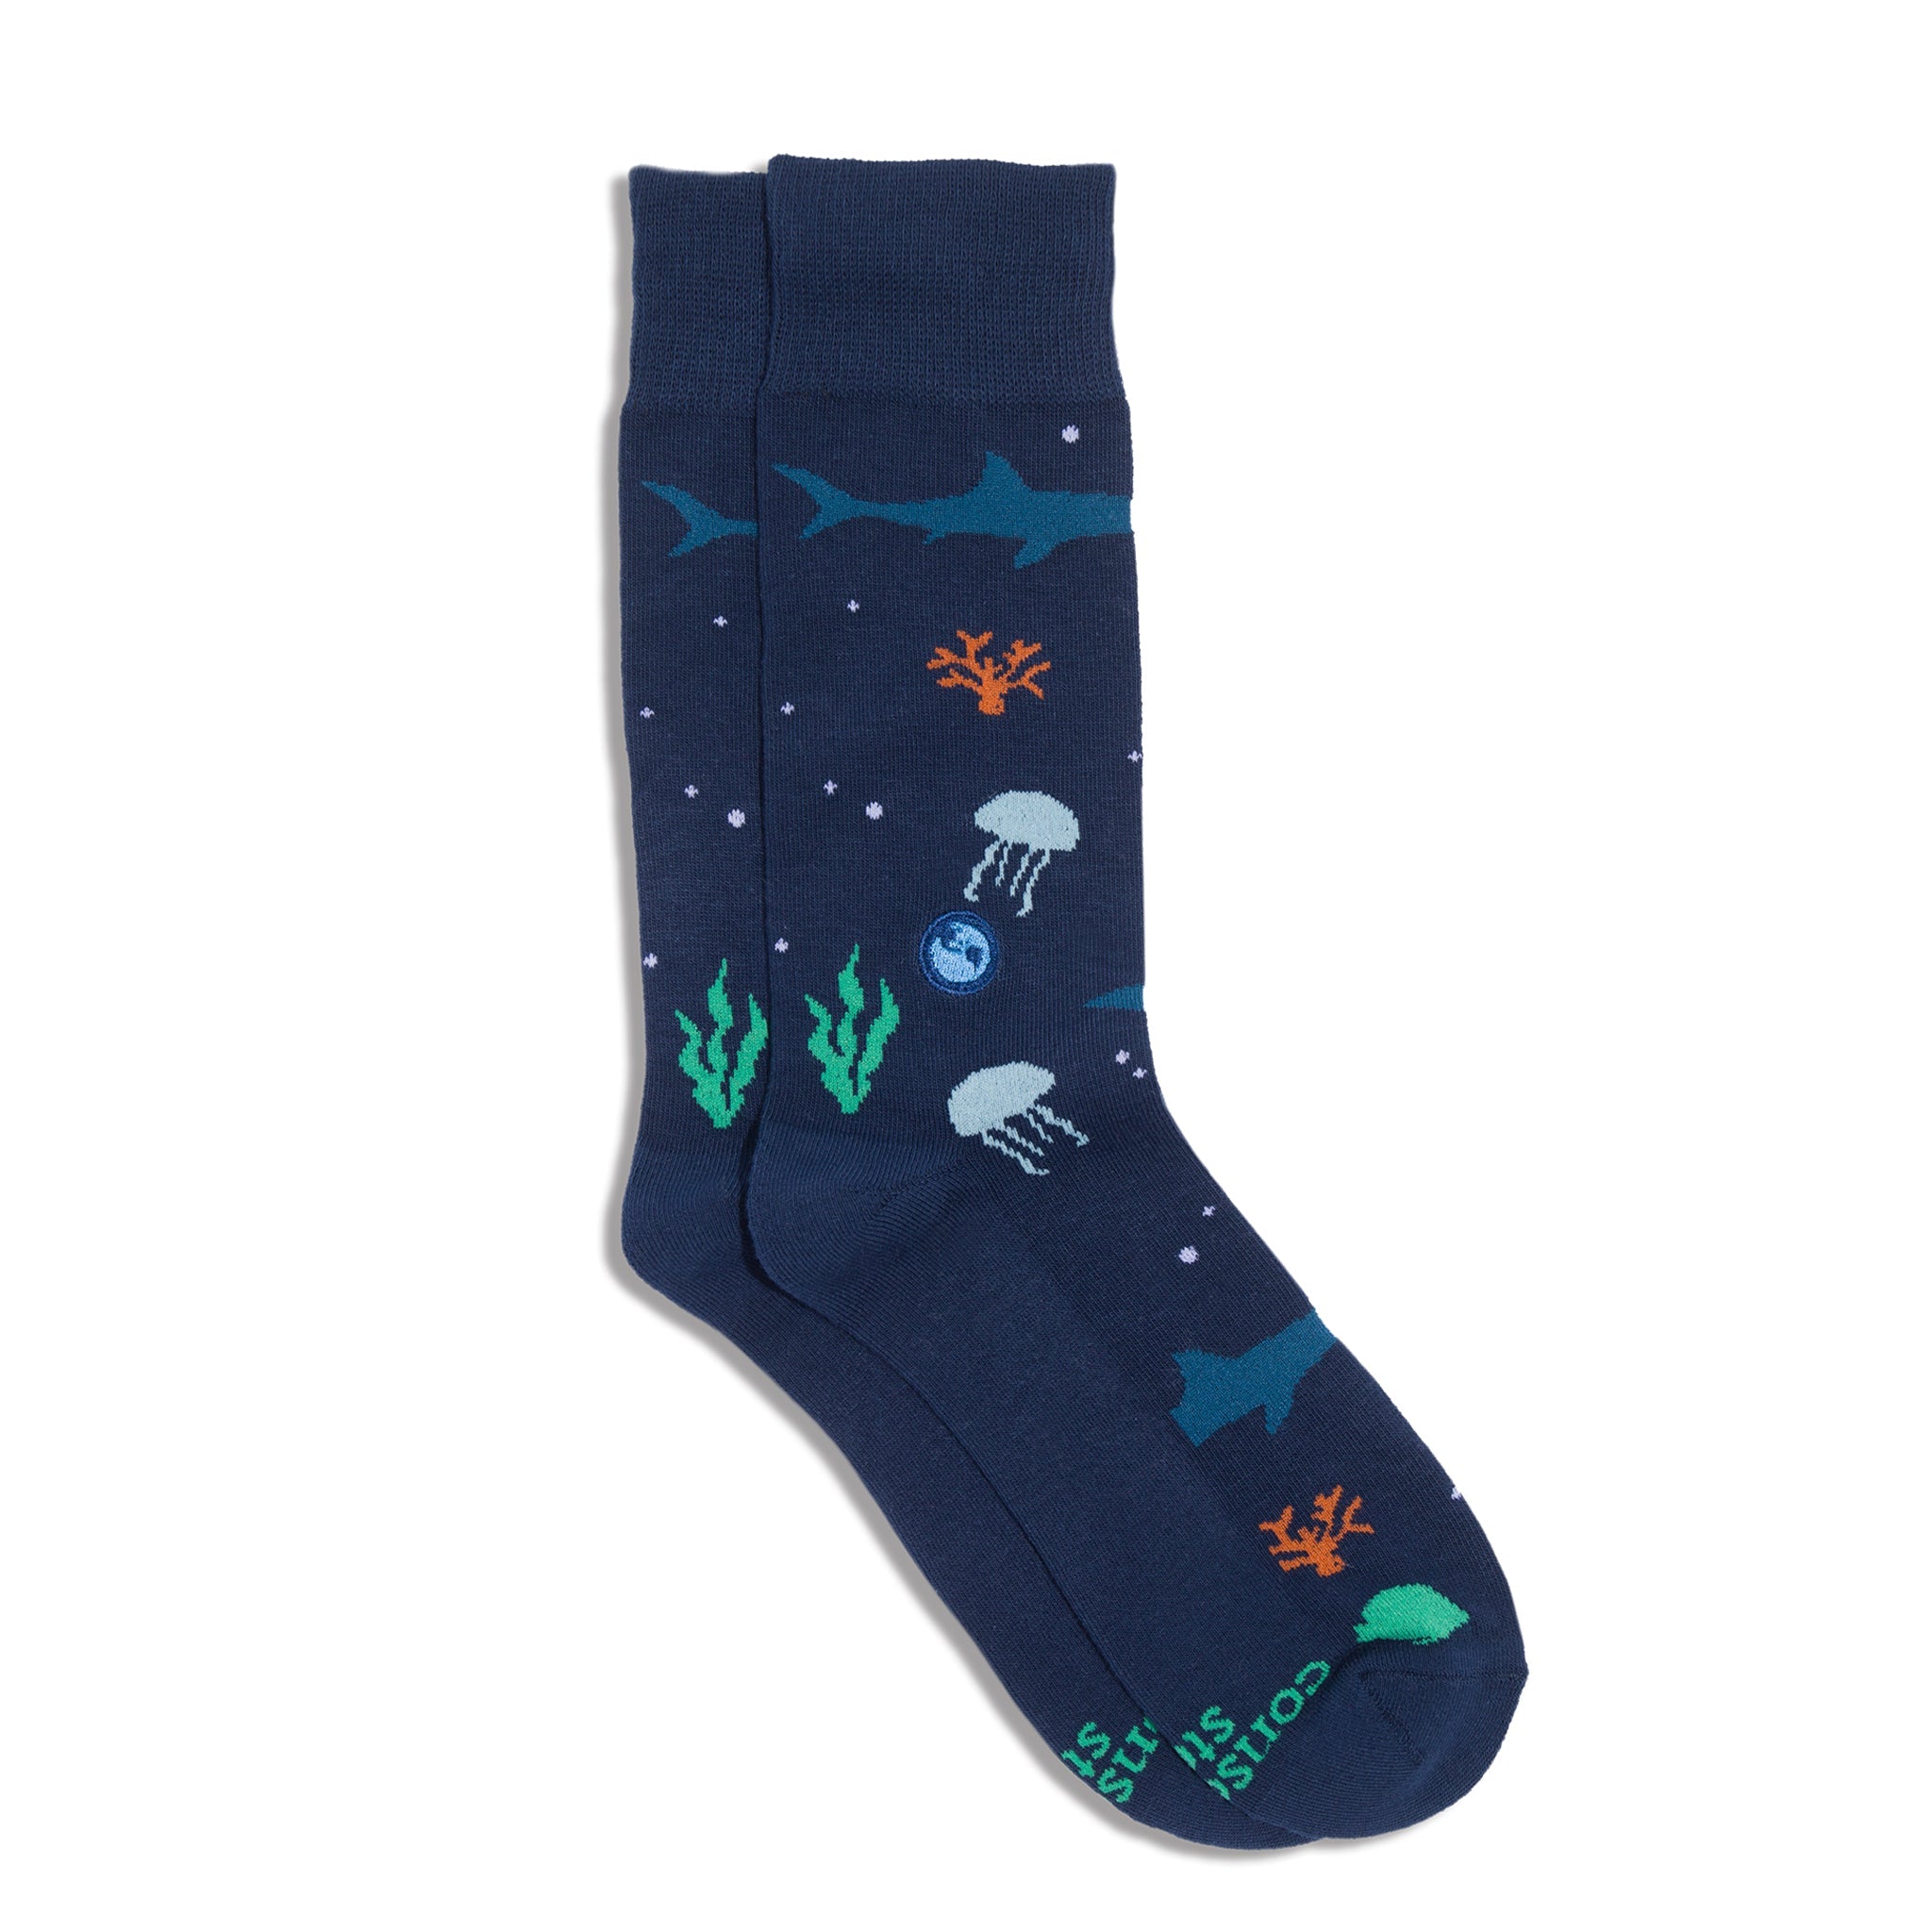 Close-up of Navy Ocean Socks featuring jellyfish, and ocean life
